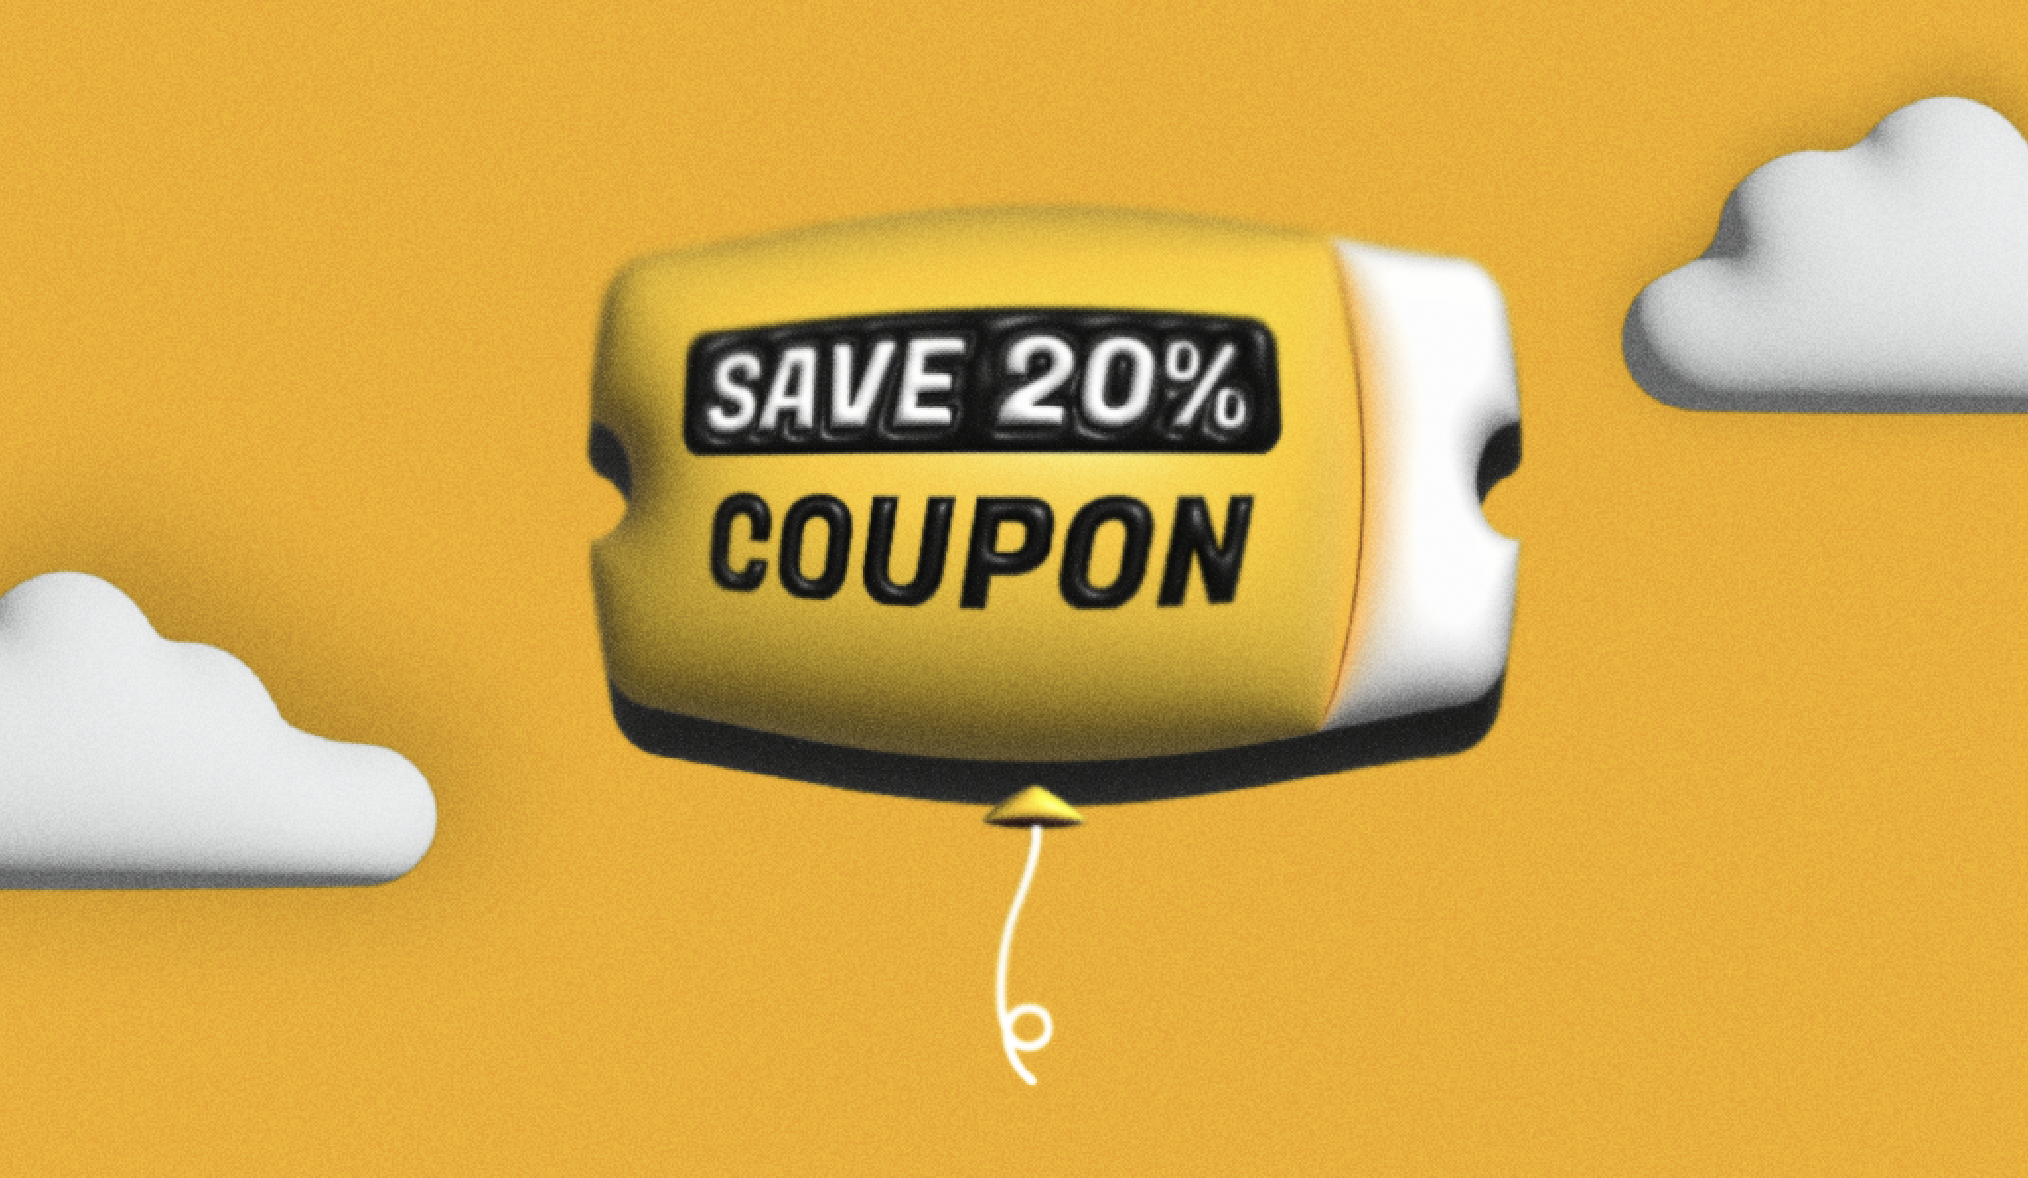 More Dollar General 5 off of 20 Gain Couponing Deals for November 18th 